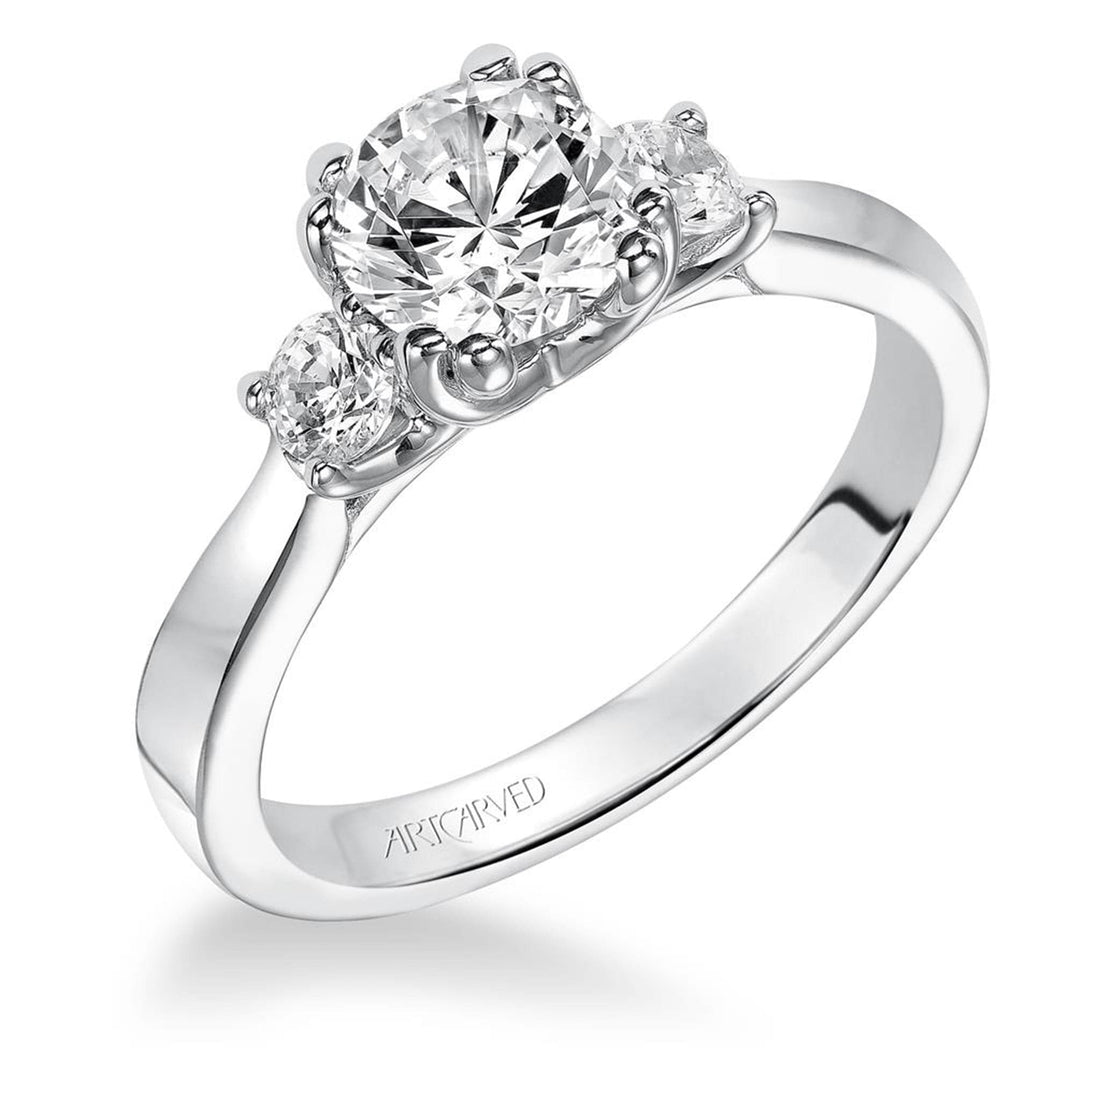 Three Stone Cushion-Cut Diamond Engagement Ring by Artcarved Angle